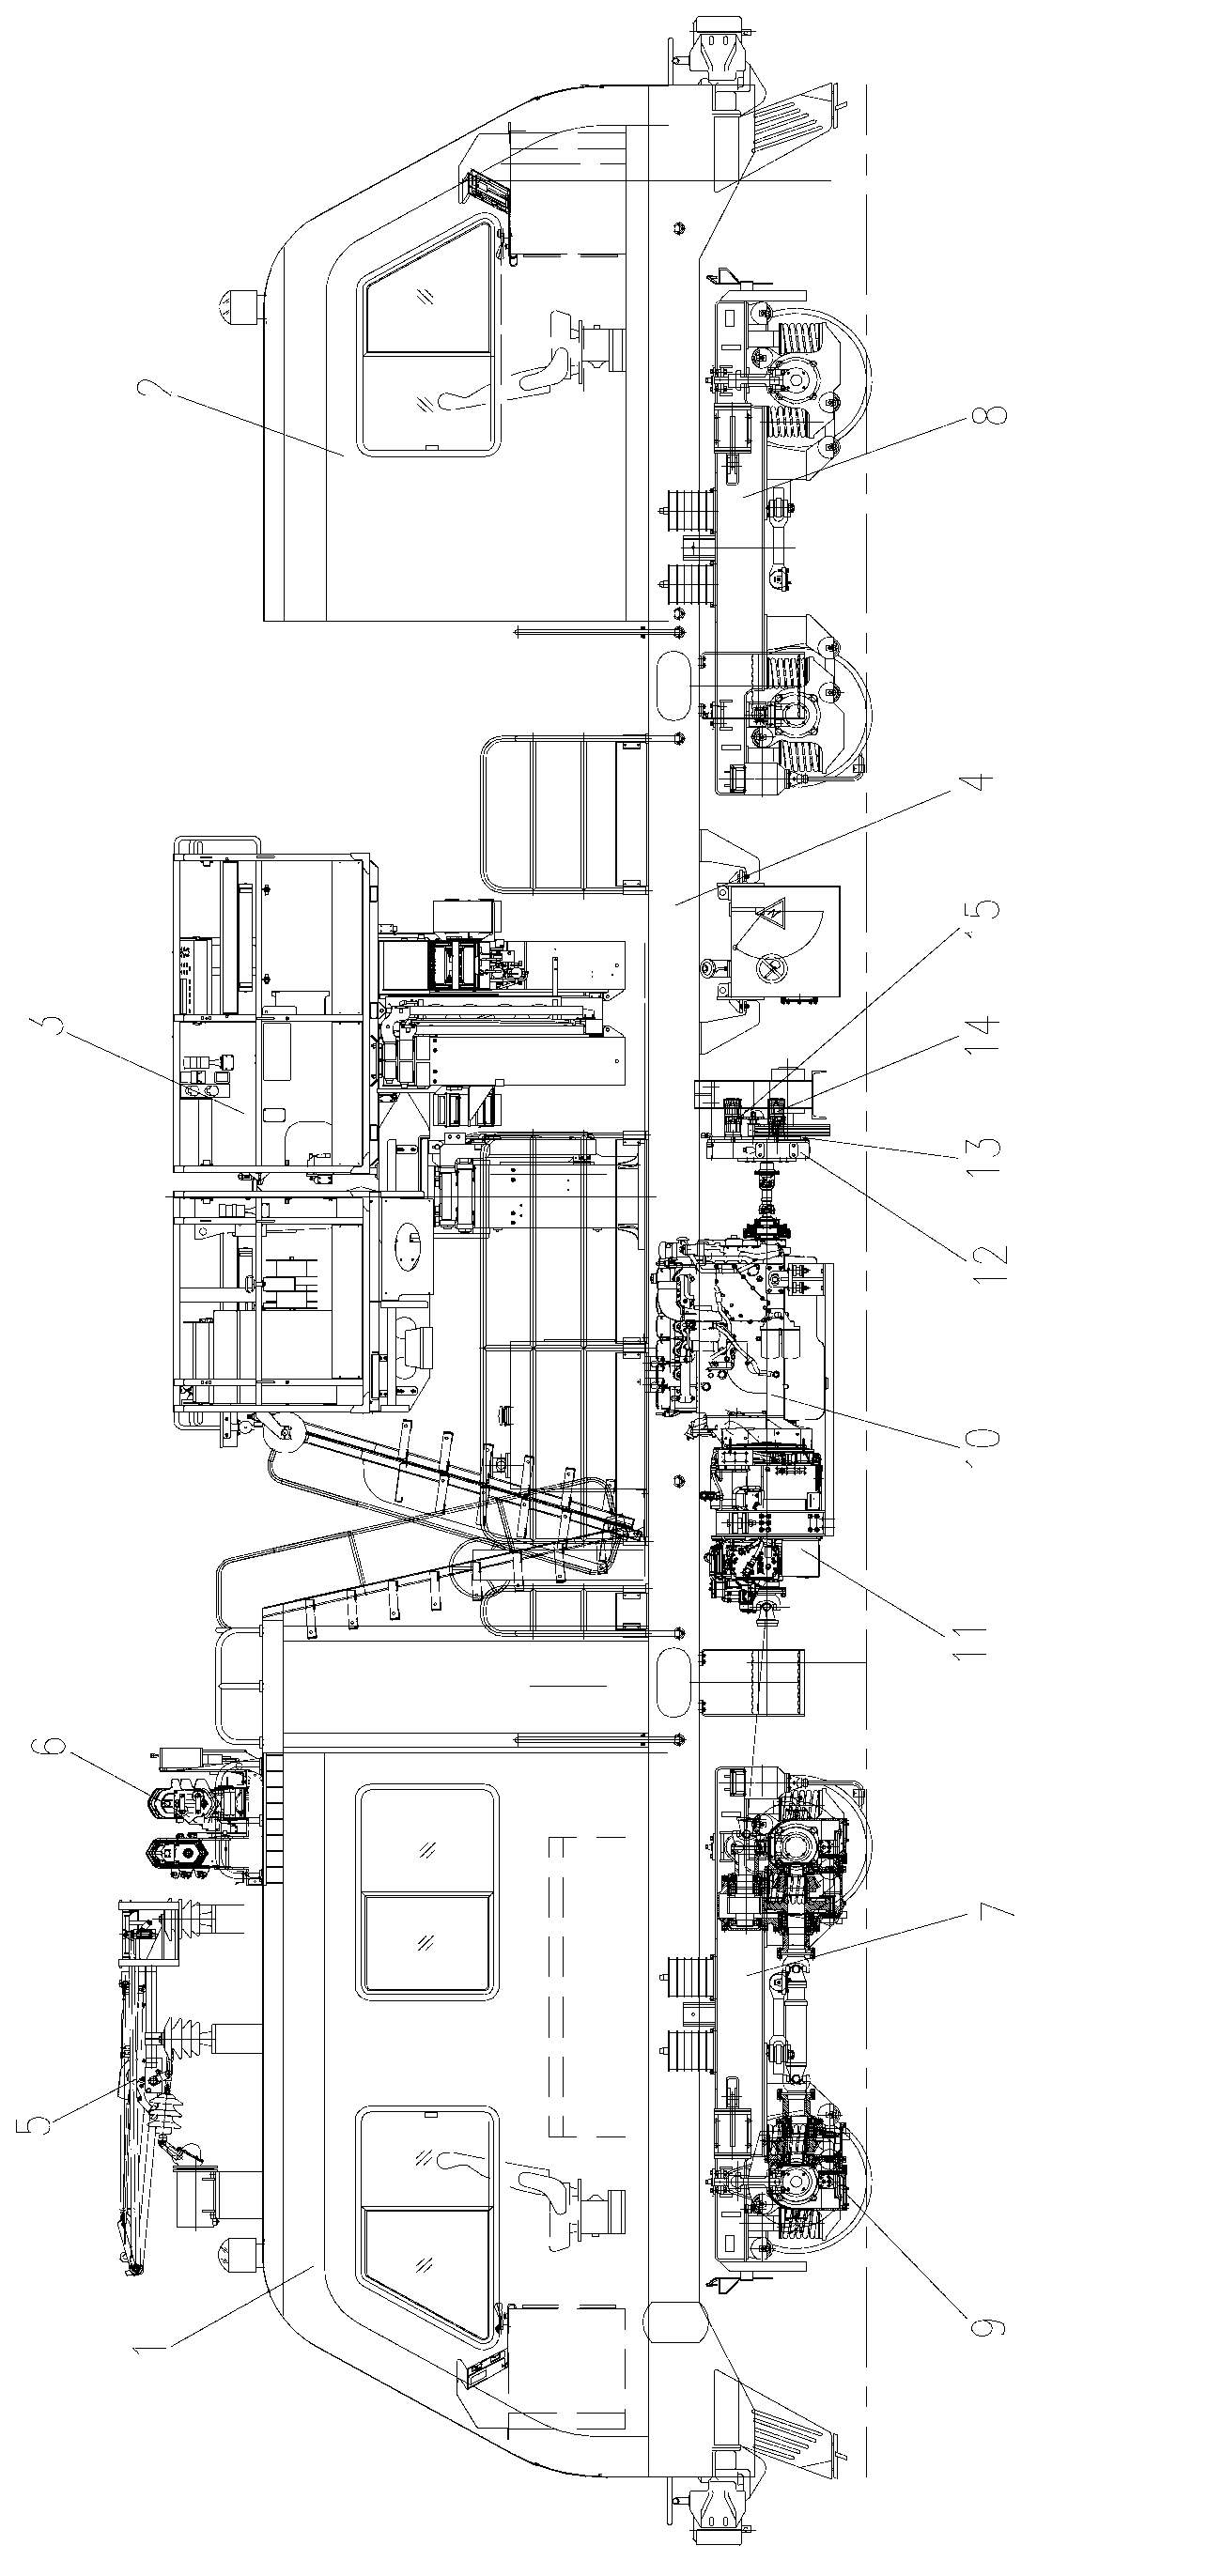 Multi-working-face contact network work vehicle